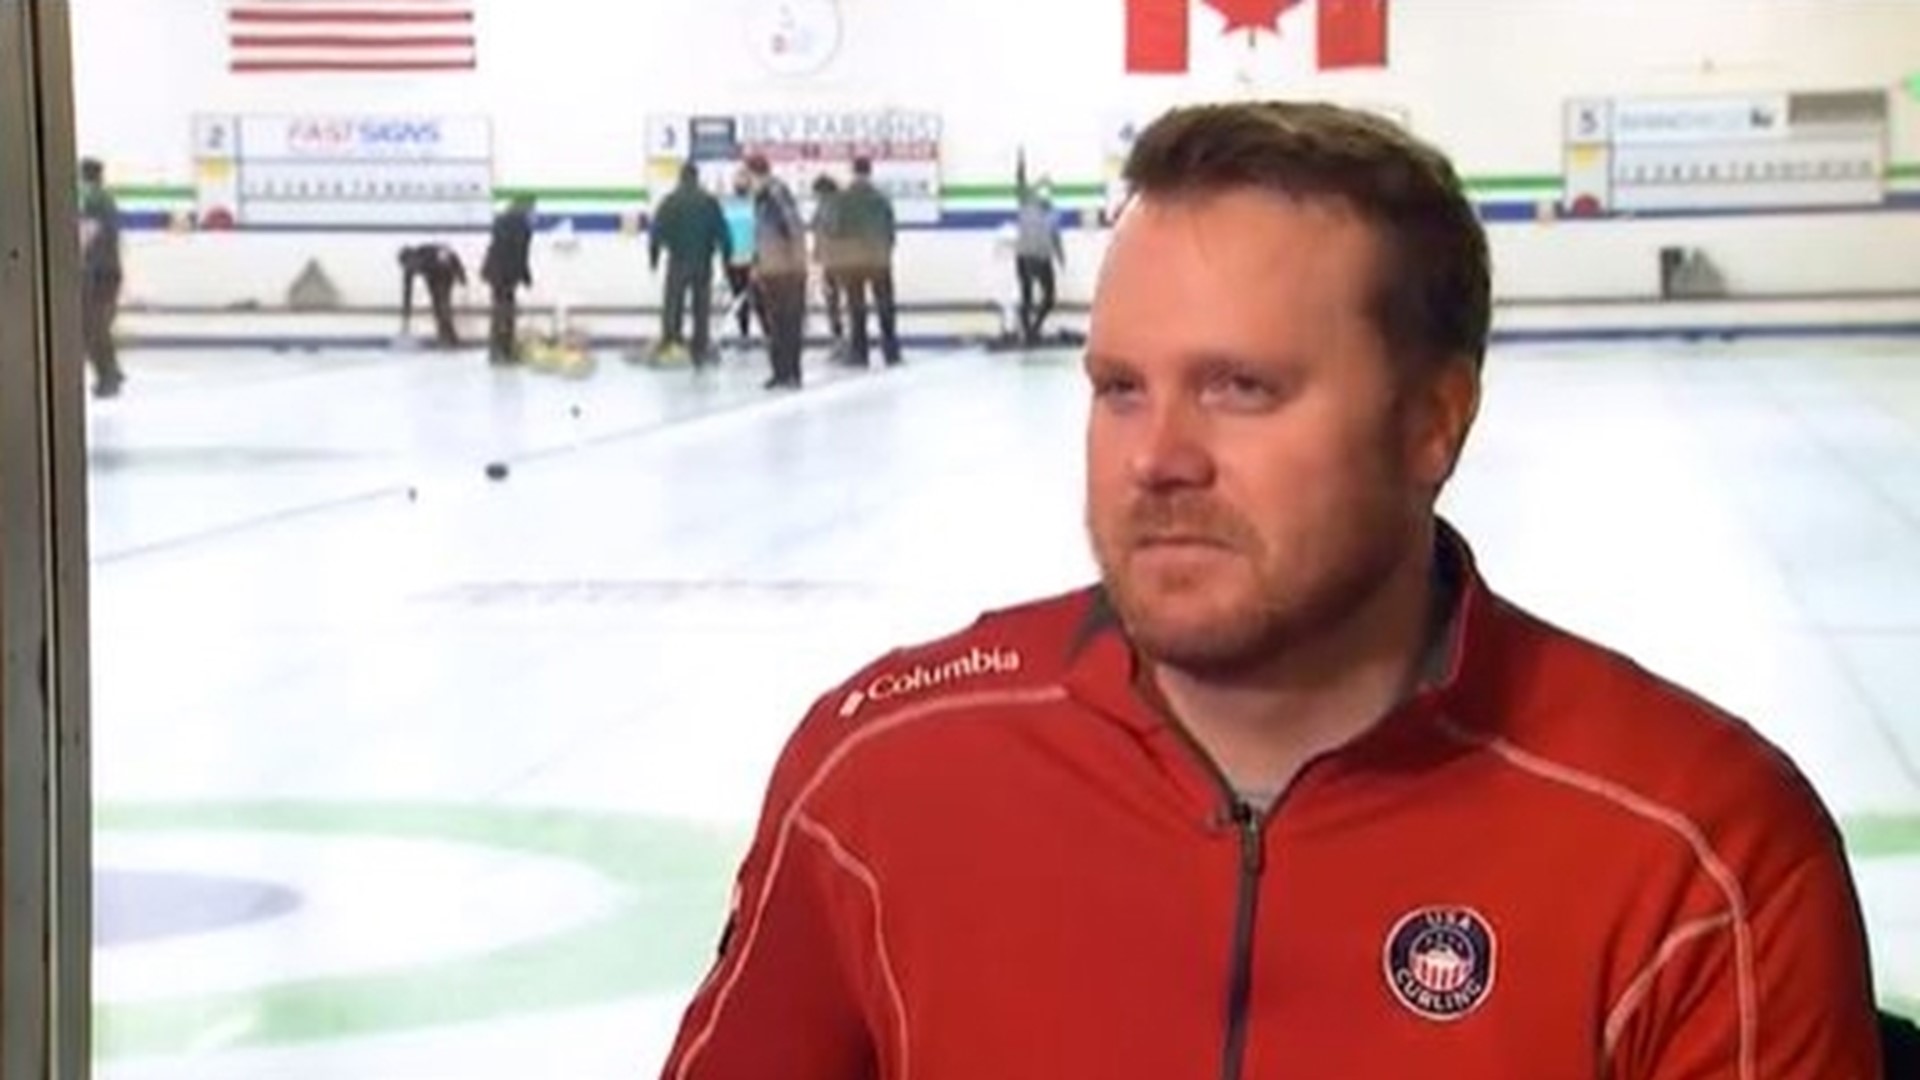 Sean Beighton was born in Edmonds and grew up curling at the Granite Curling Club. Now, he’s trying to bring home gold as a coach of the U.S. curling team.